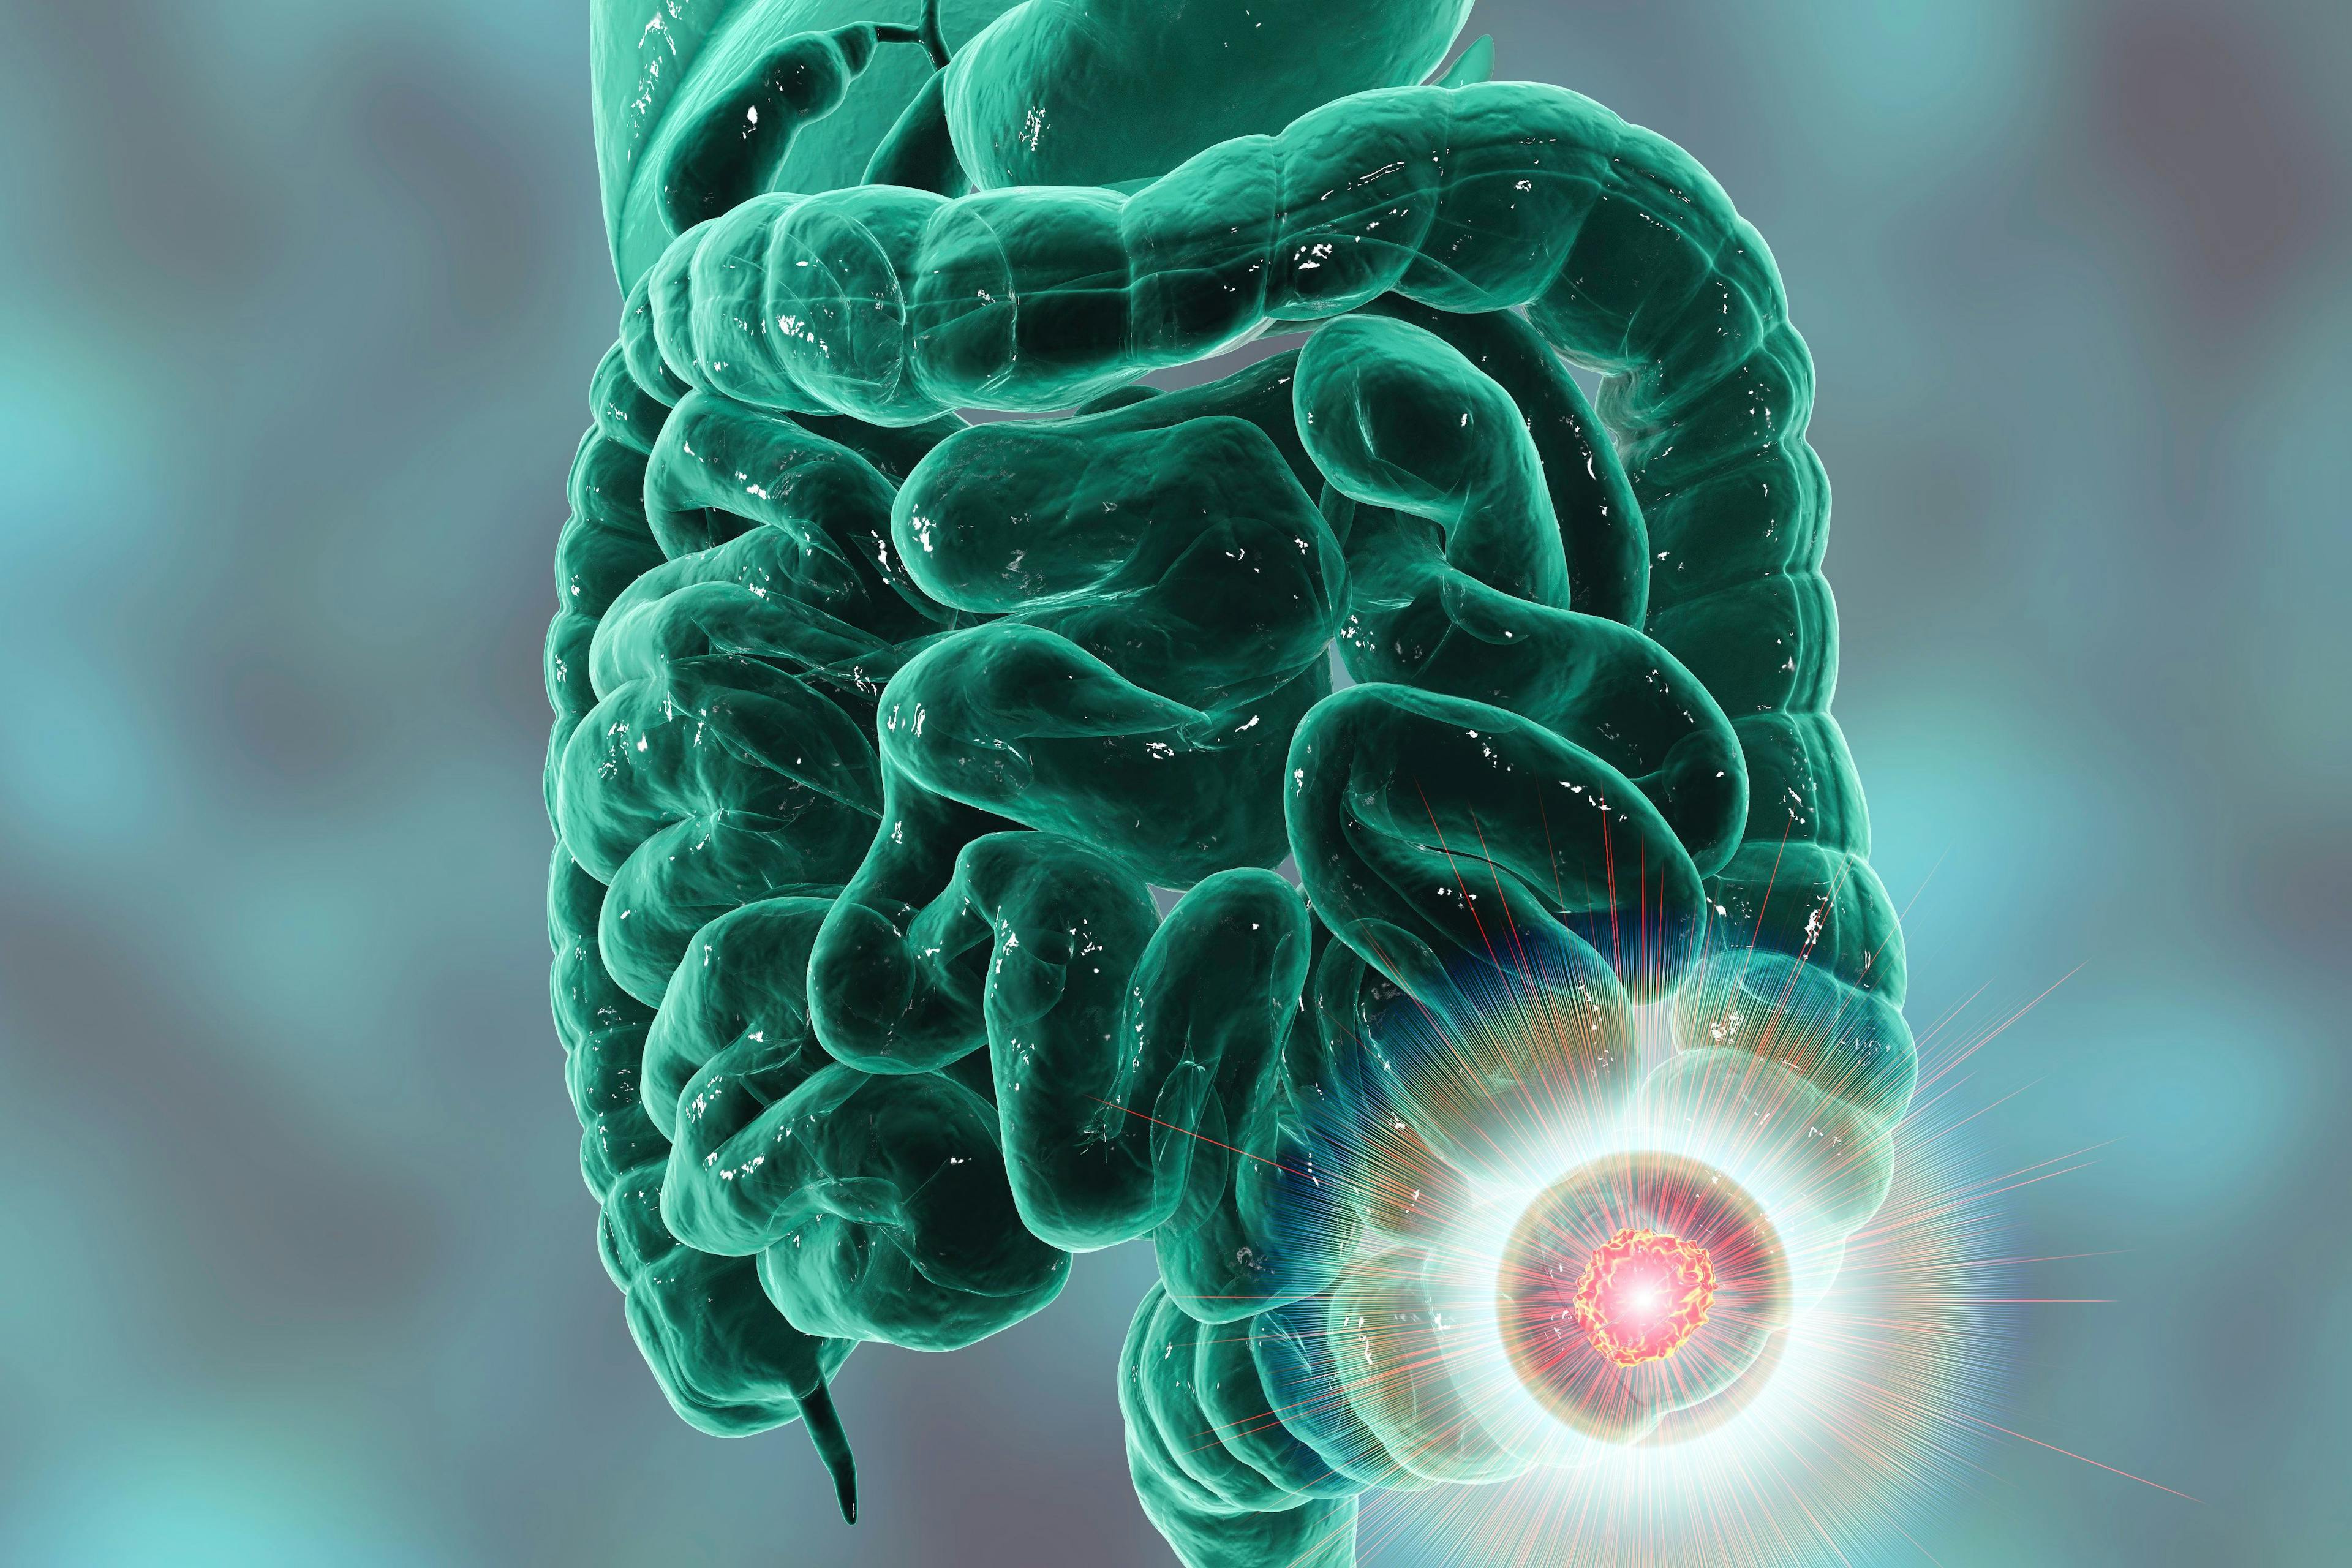 Celyad Discontinues CYAD-101 for Metastatic Colorectal Cancer